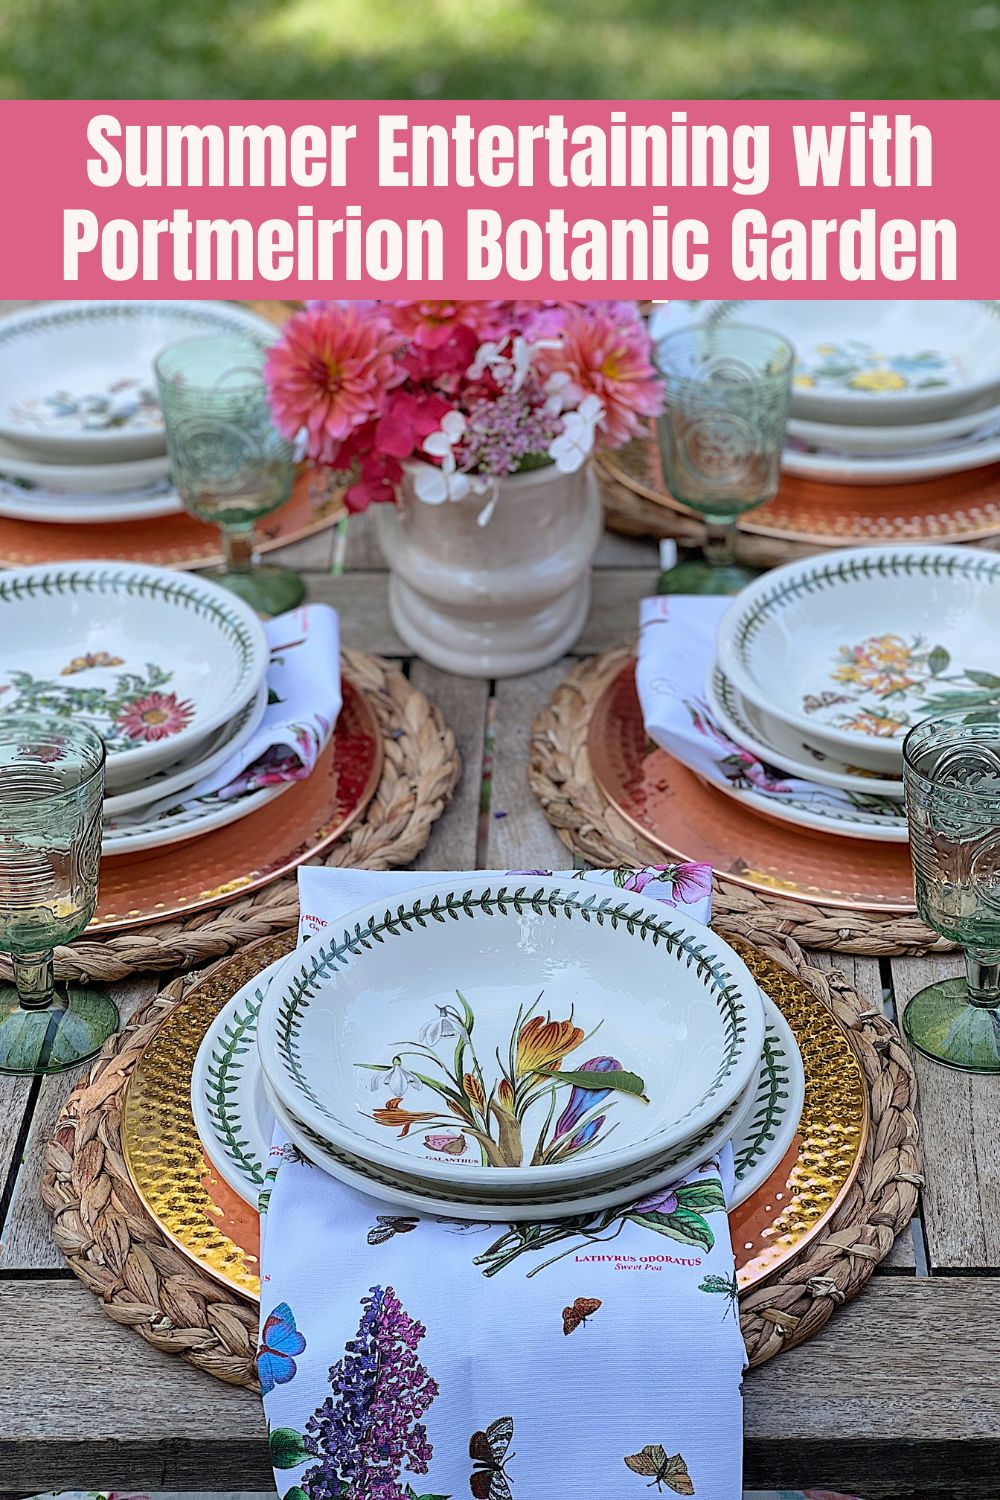 One of my favorite china patterns, Portmeirion Botanic Garden, is celebrating its 50th Anniversary and I can't wait to share this with you.